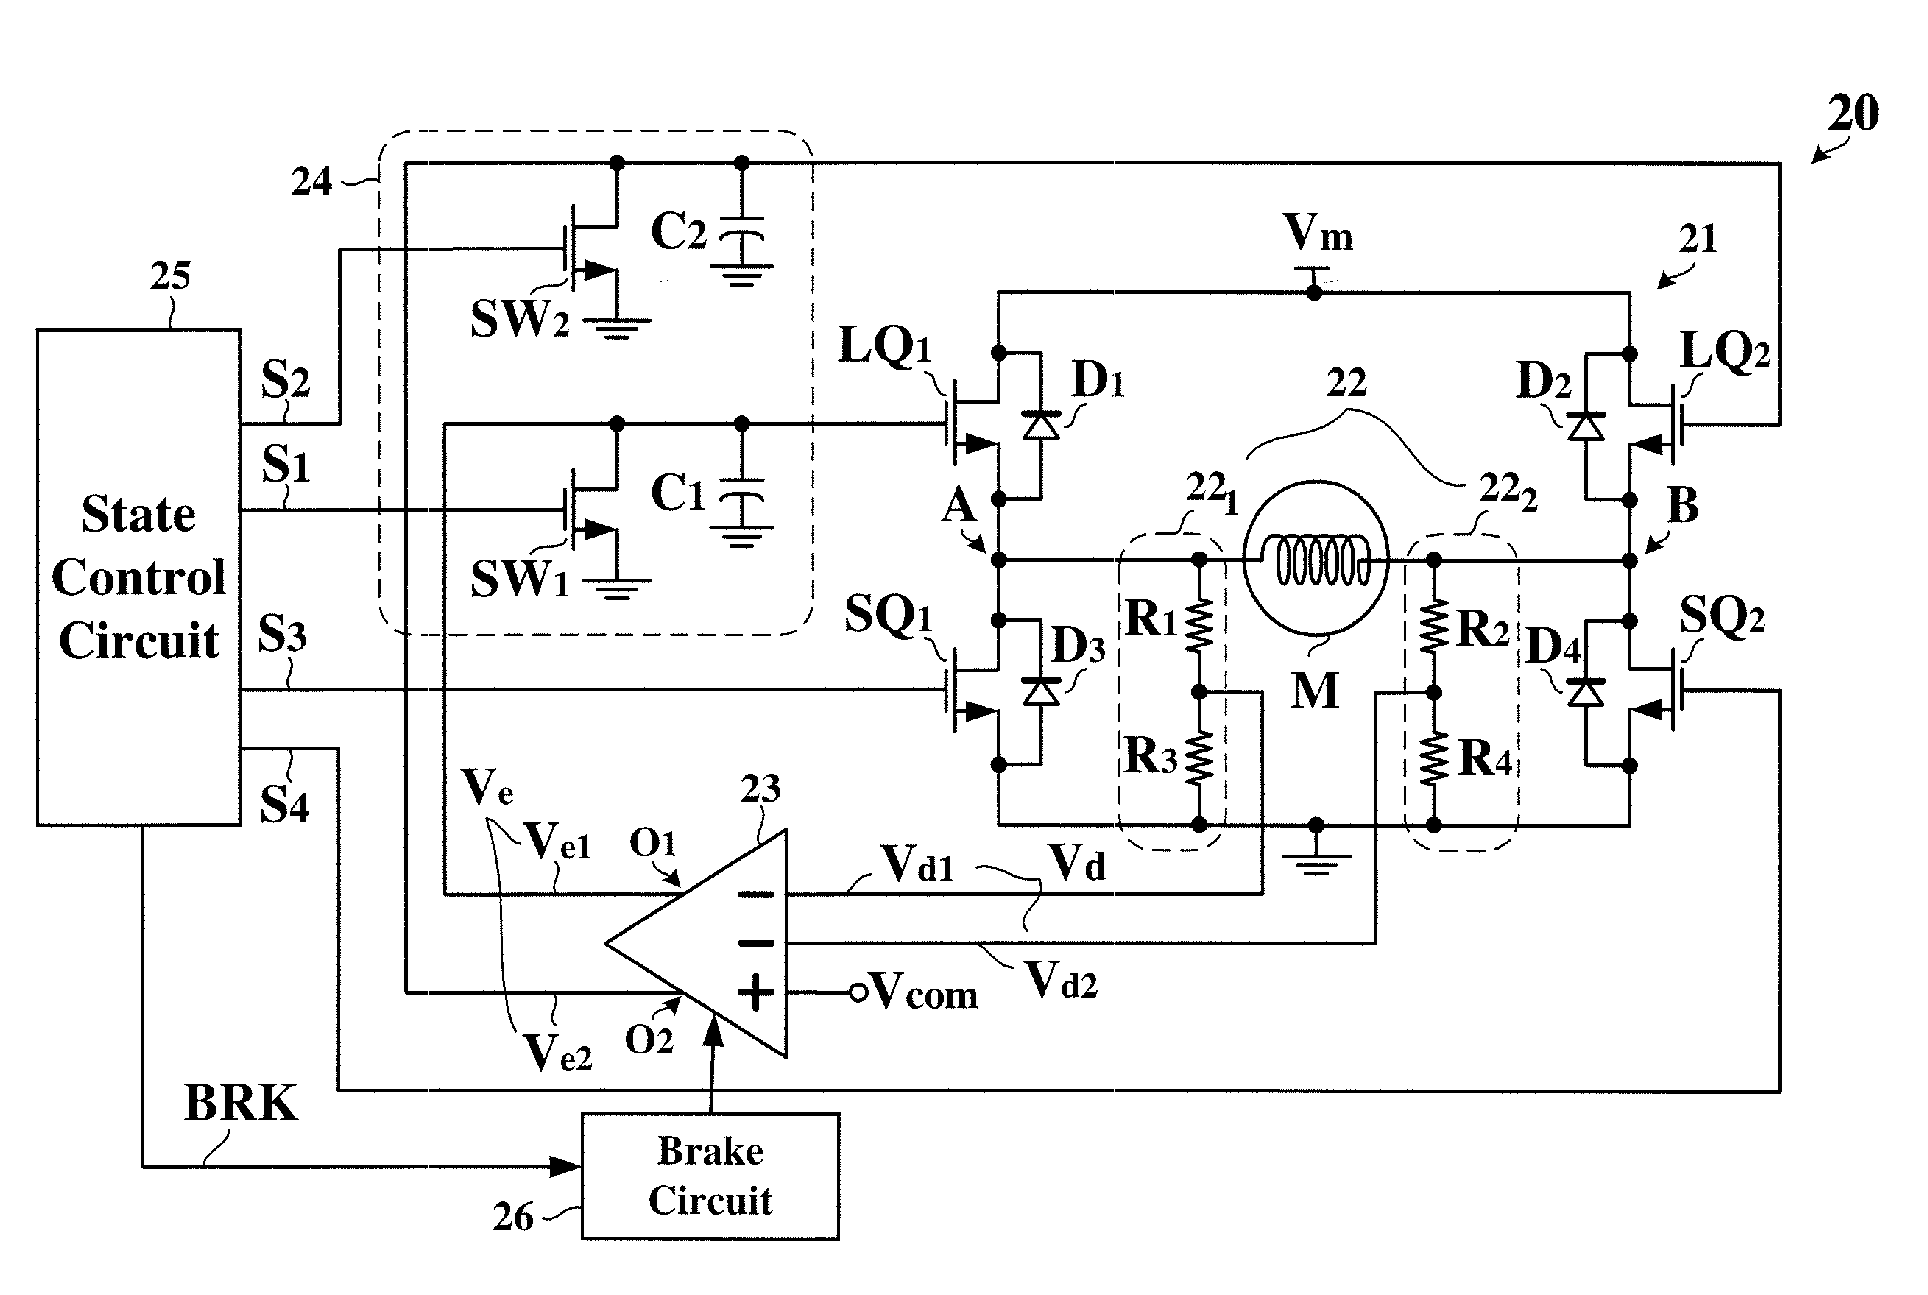 Motor control circuit for supplying a controllable driving voltage